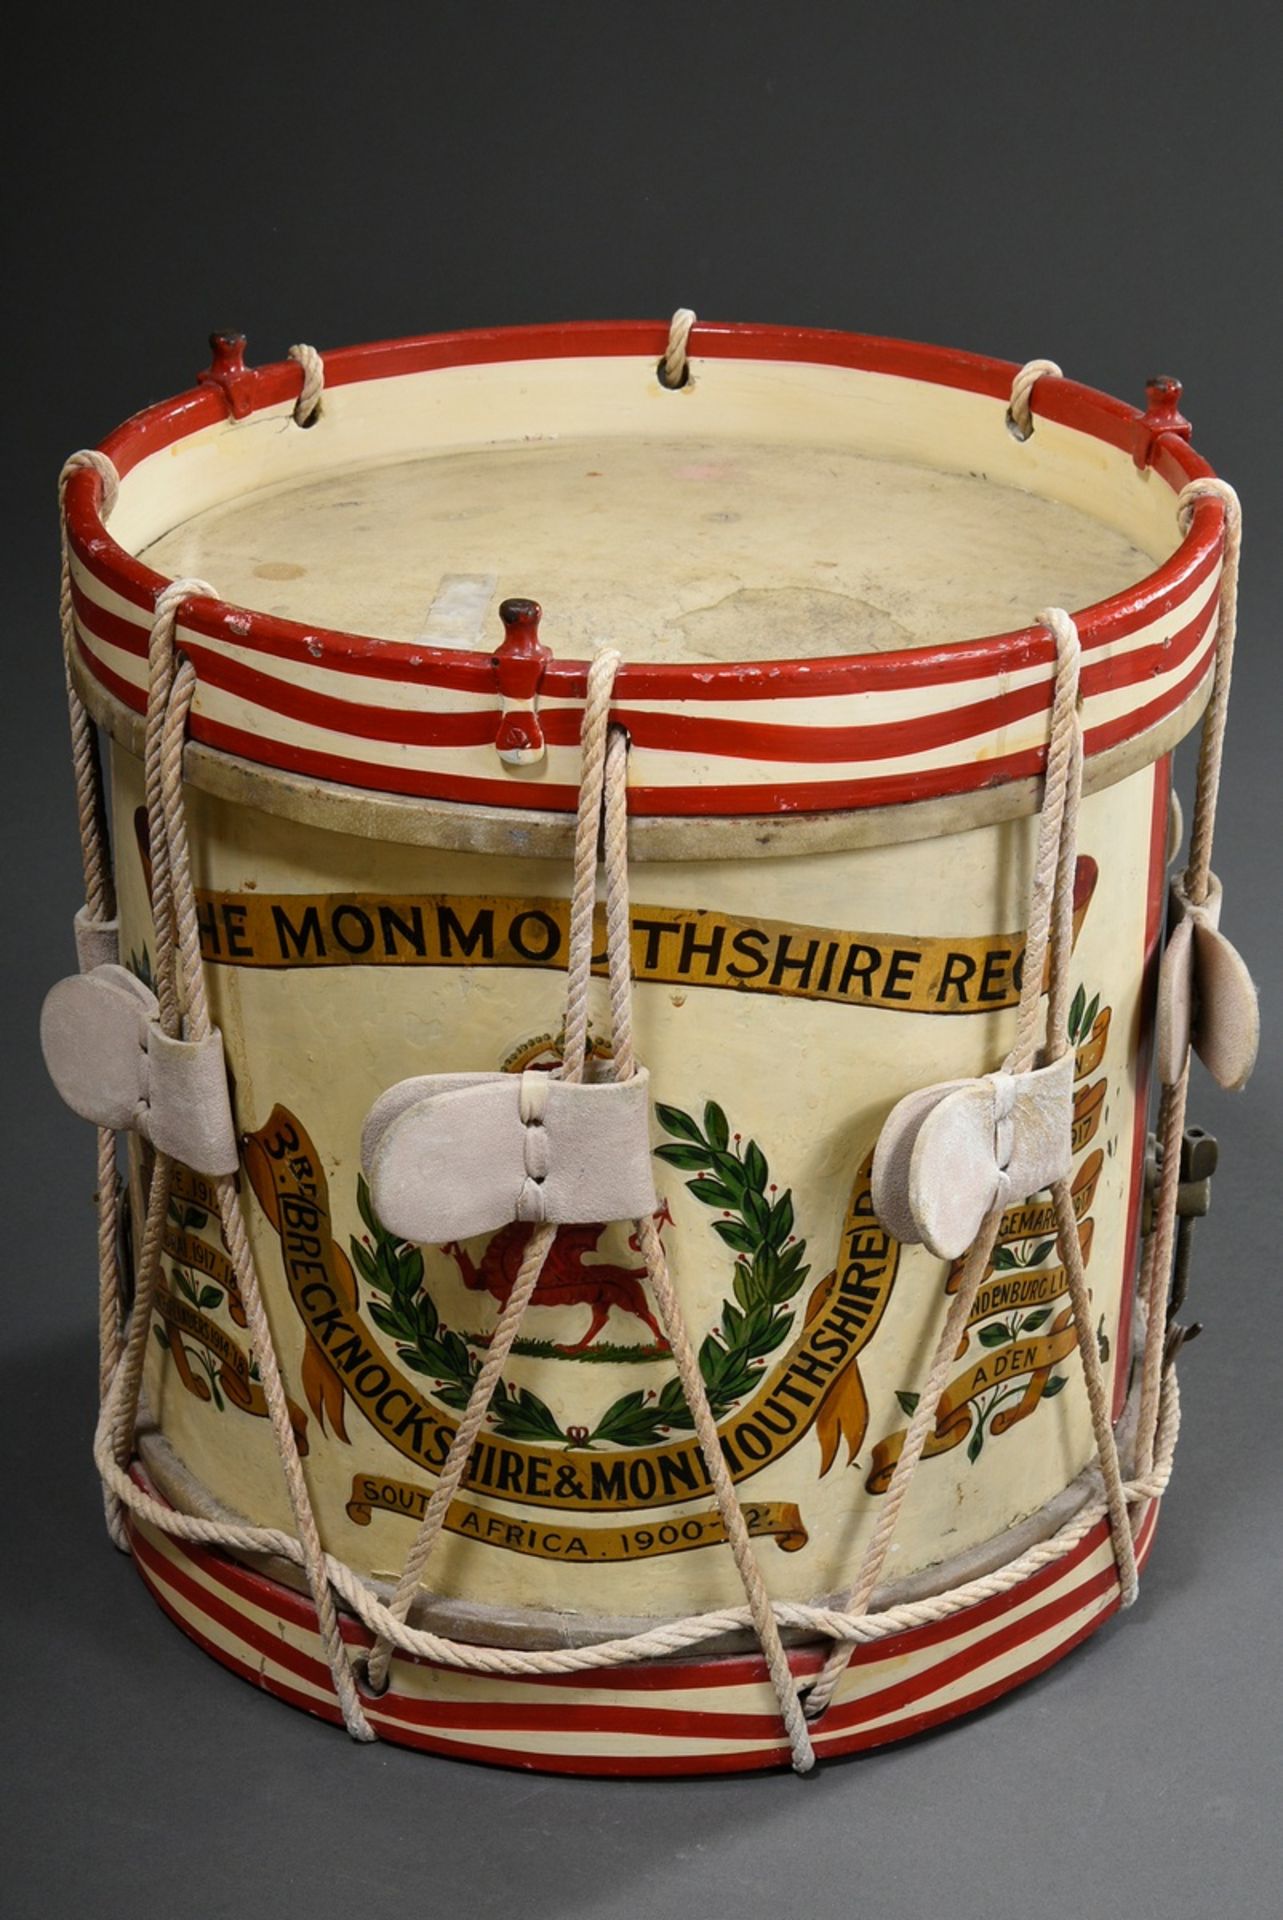 English regimental drum "The Monmouthshire Regiment", inscribed on the side: "Ypres 1915/17/18, Som - Image 2 of 6